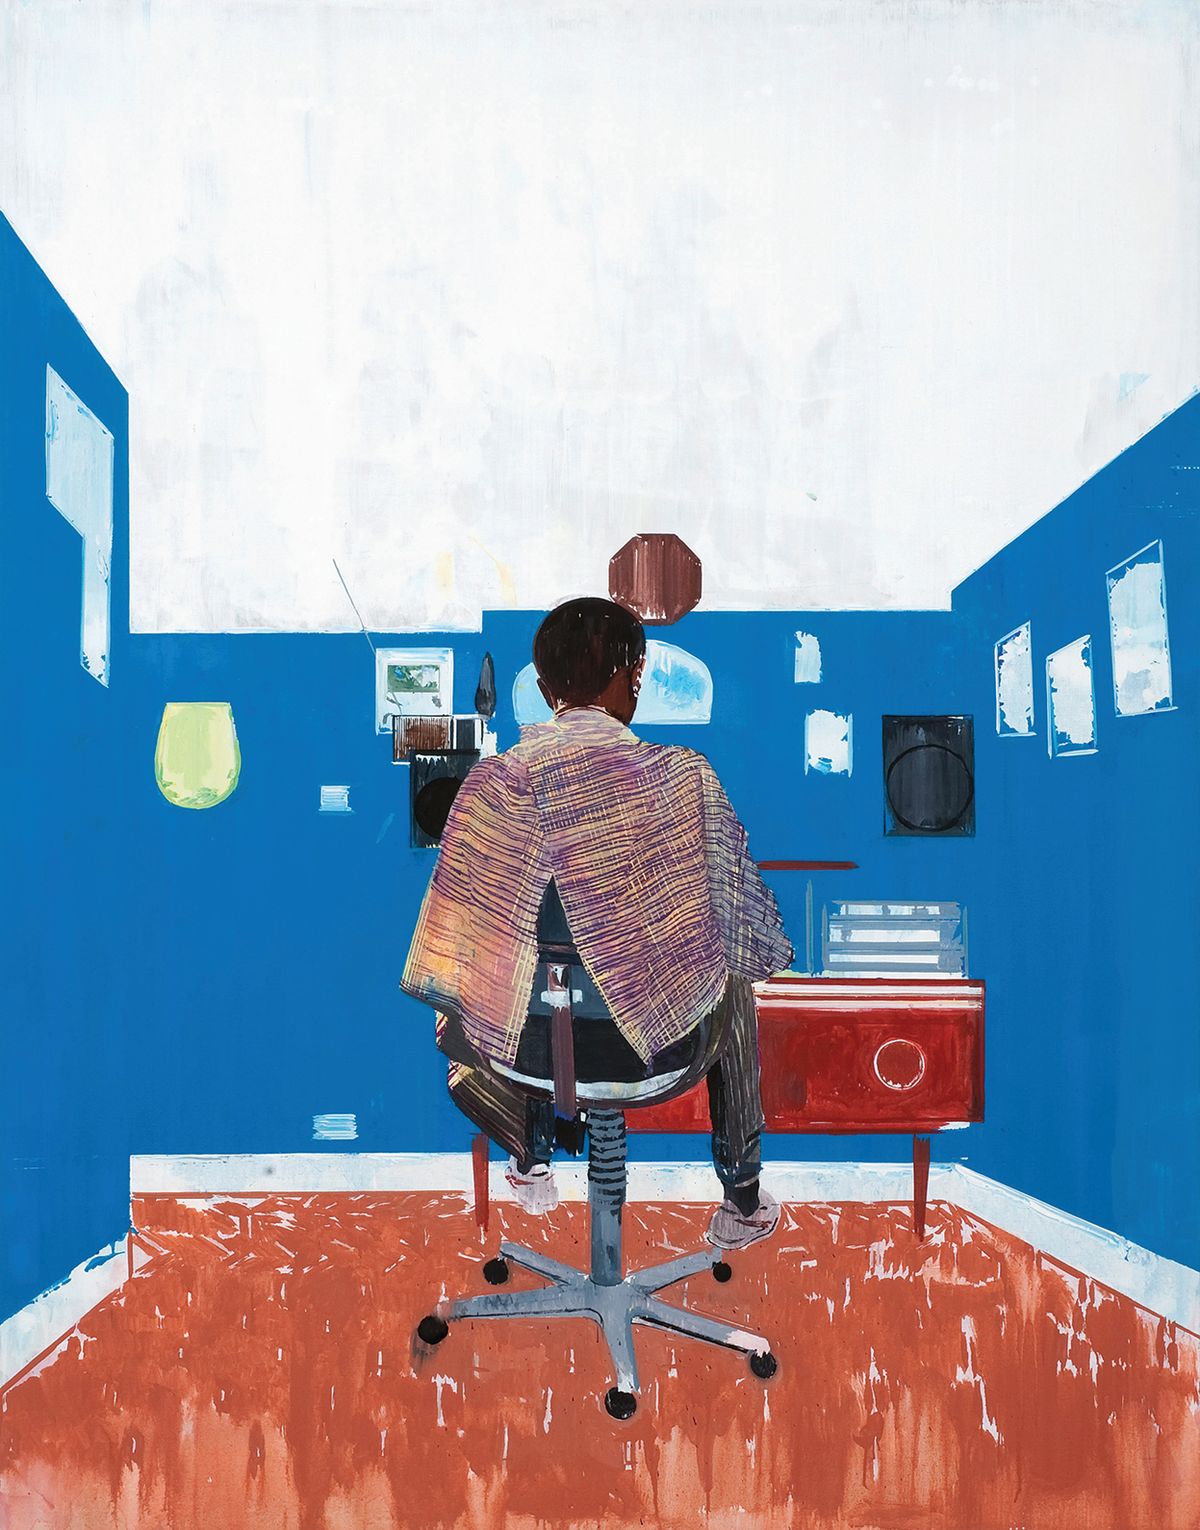 Hurvin Anderson’s Back (2008) from Peter’s Series, which was shown at Tate Britain in 2009, recalls the attic barbershop in Birmingham frequented by the artist’s father
© Hurvin Anderson; photo: Catherine Wharfe; courtesy the artist and Thomas Dane Gallery